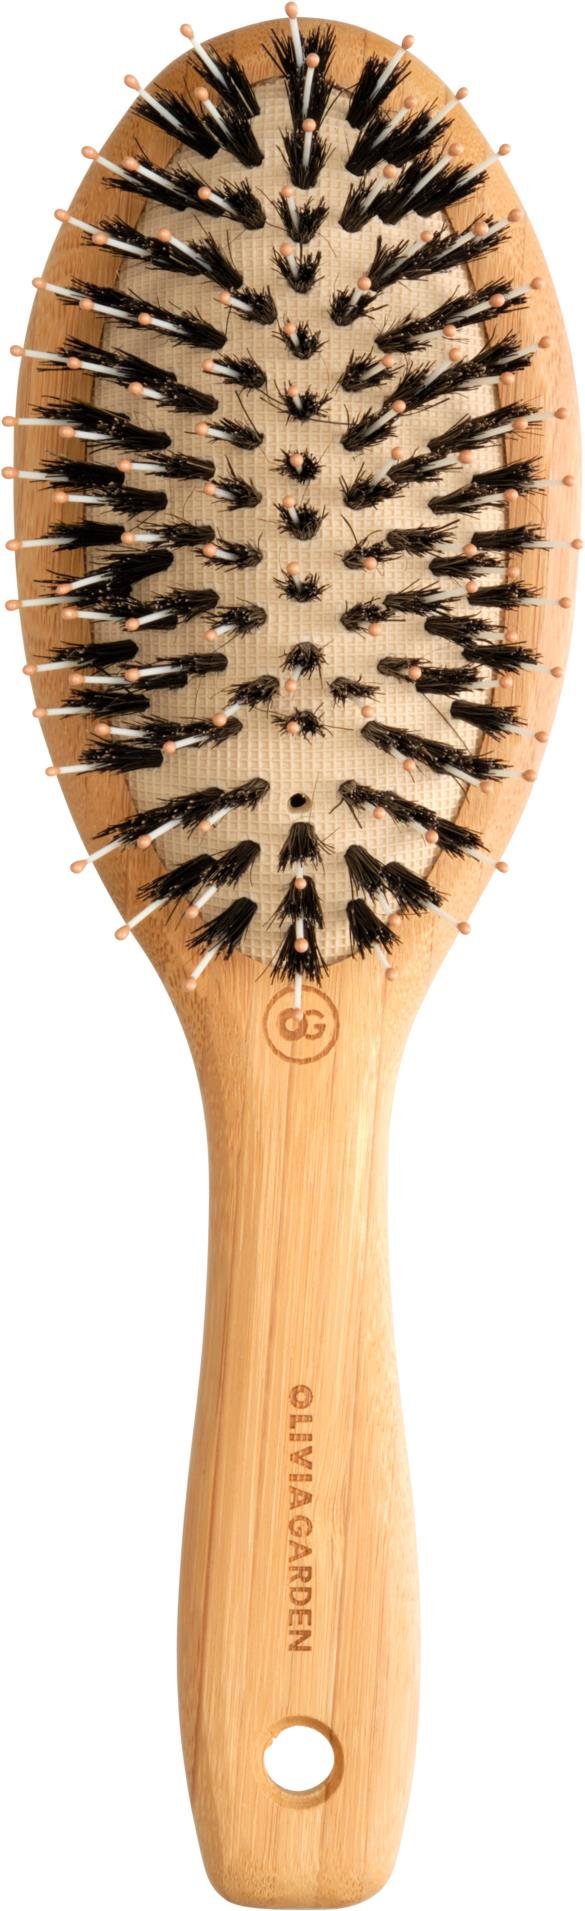 OLIVIA GARDEN Healthy Hair Professional Ionic Paddle Brush P6